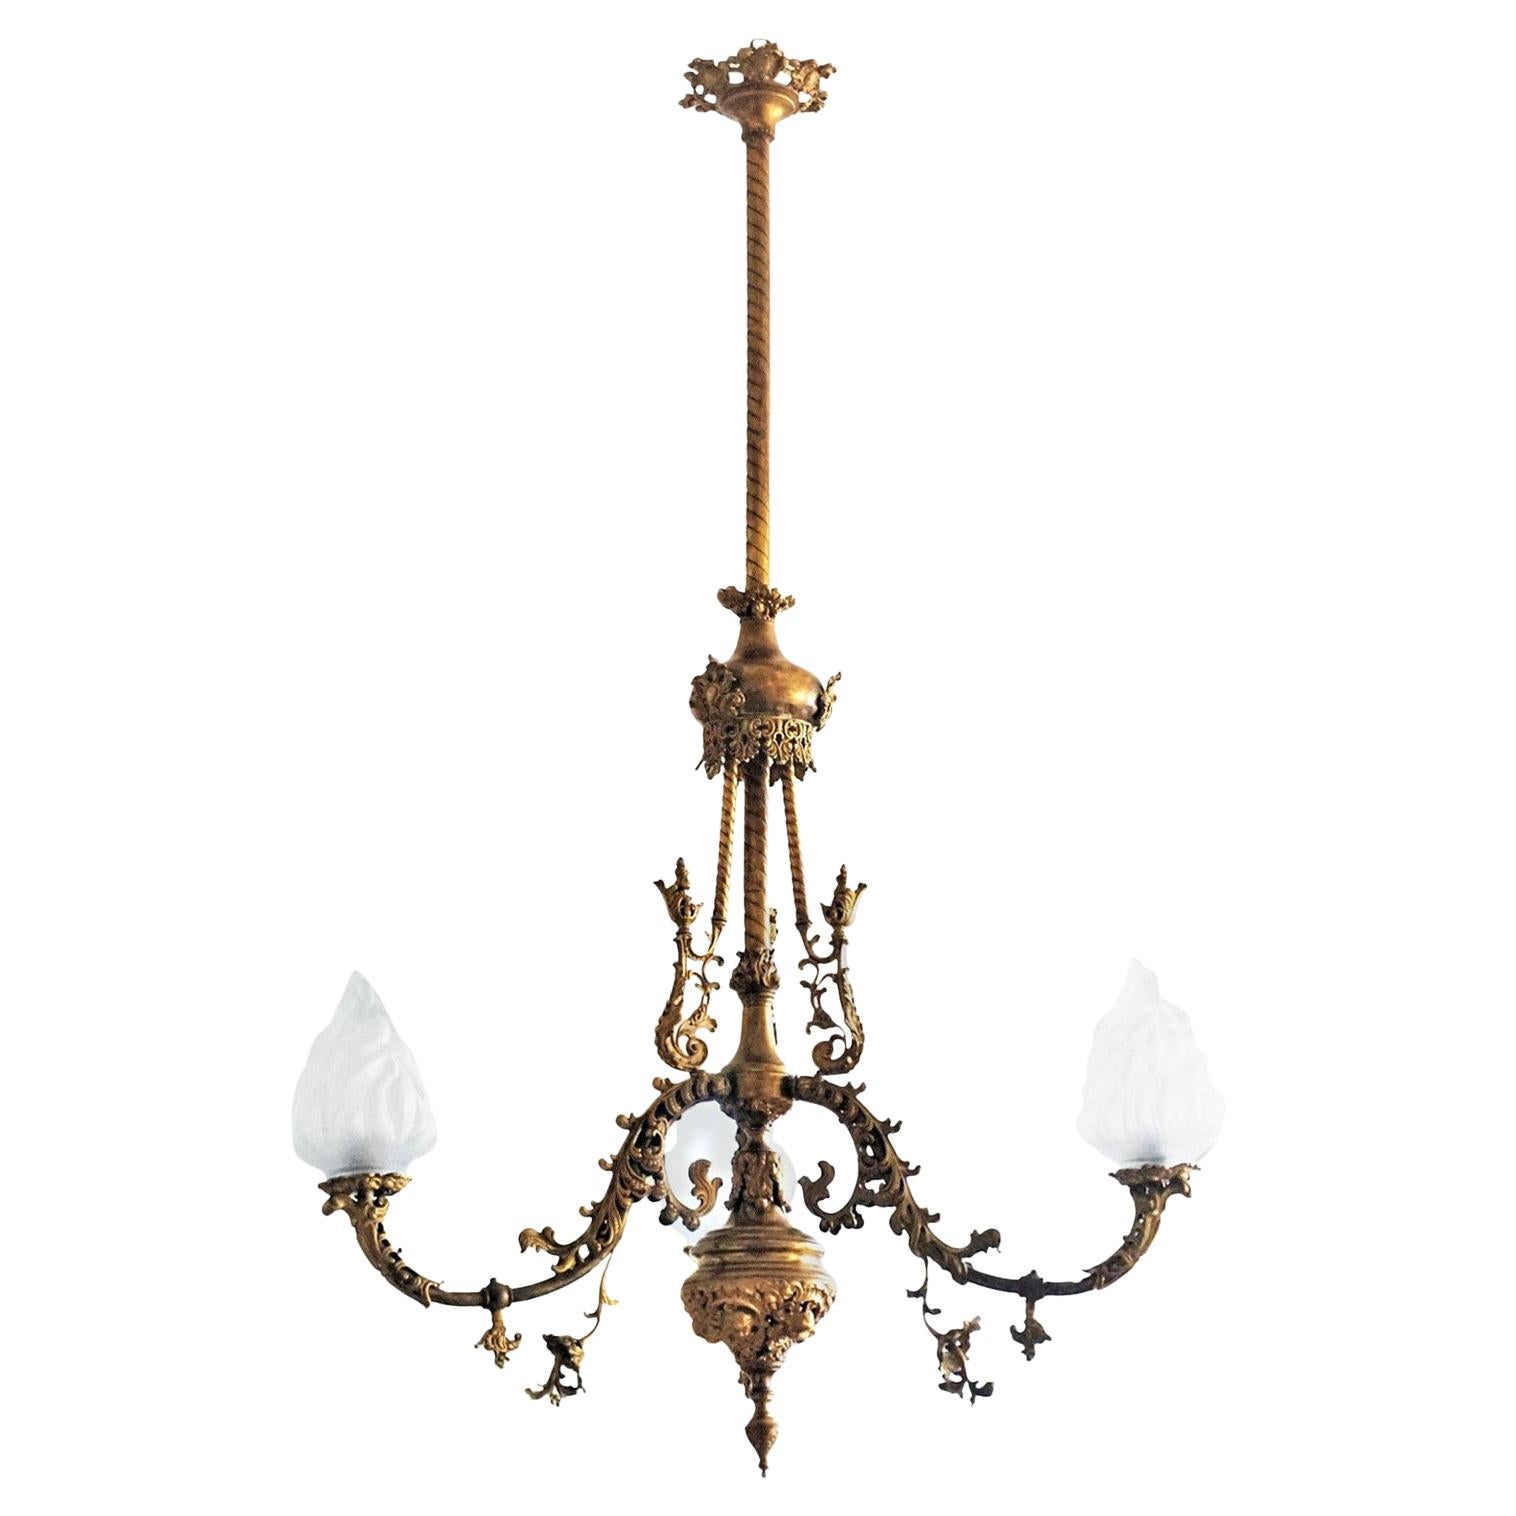 Which brand is best for chandeliers?